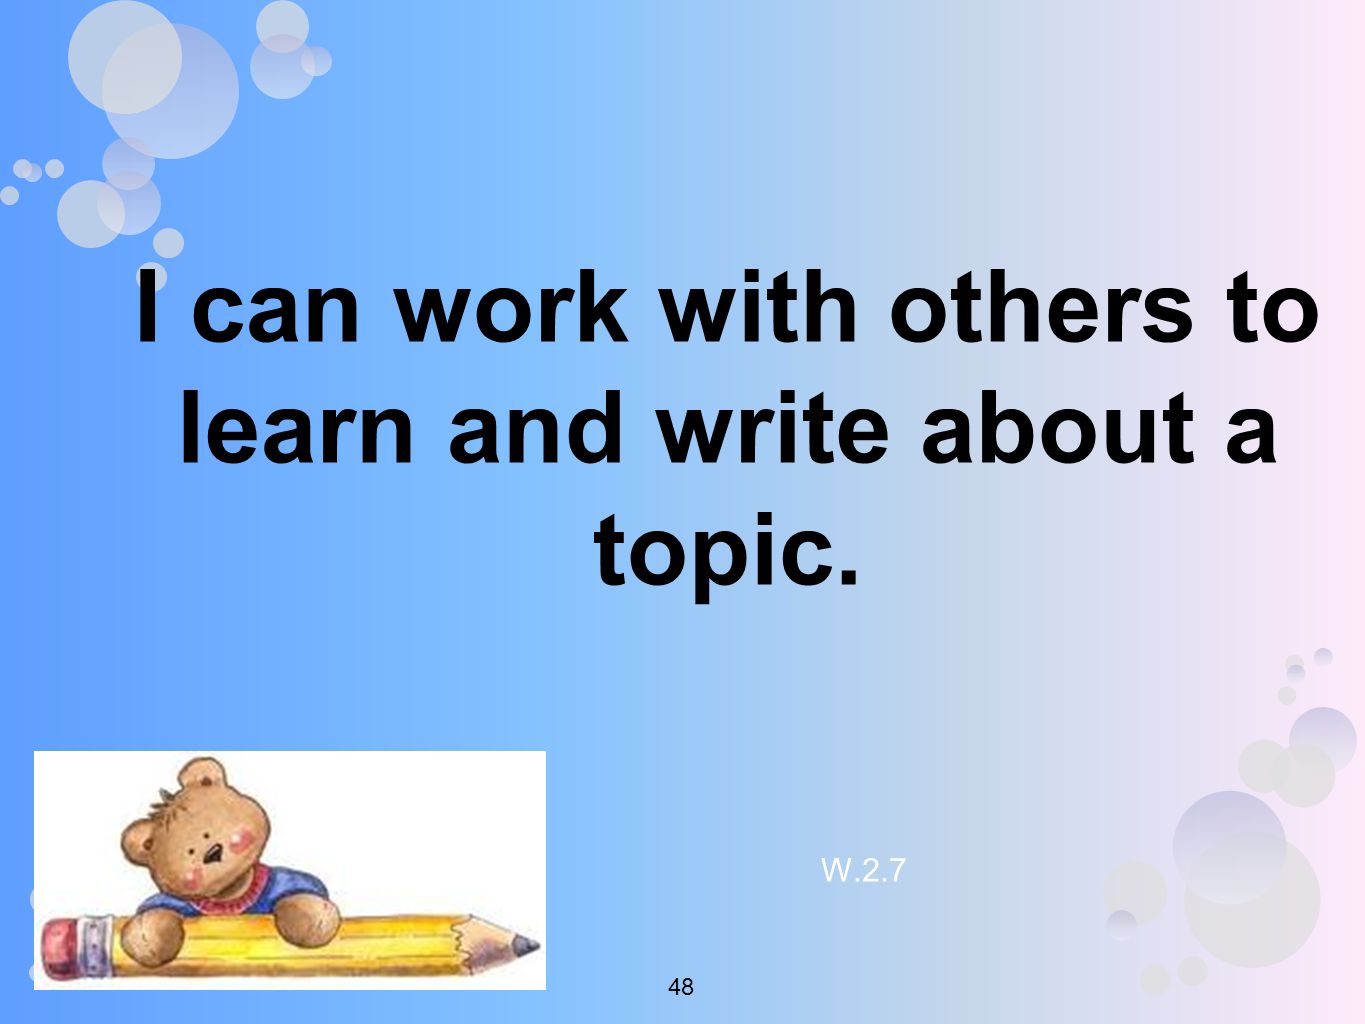 I can work with others to learn and write about a topic. W